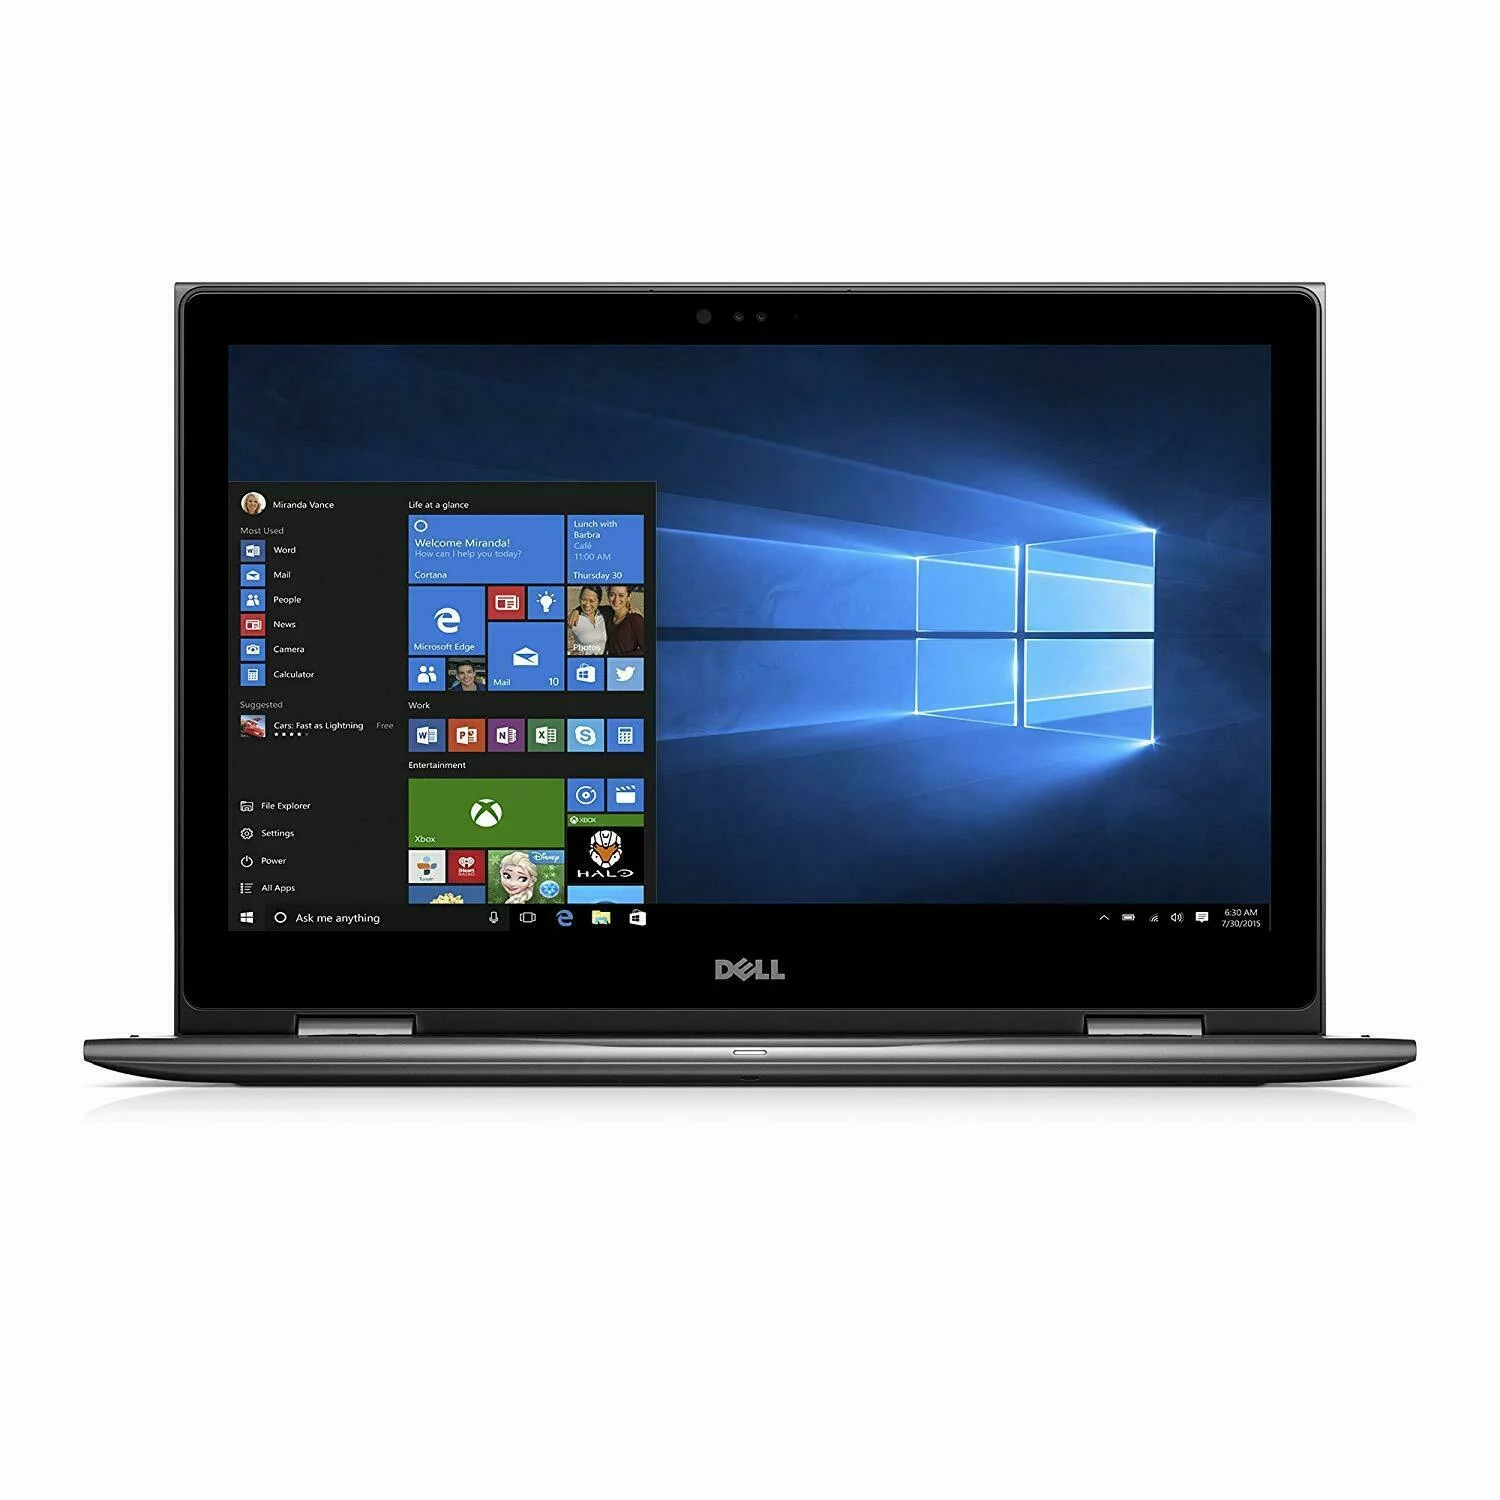 Laptop Cũ Dell Inspiron 5368 2 in 1 - Intel Core i7-6500U | 8GB DDR4 | 13.3 inch Full HD touch